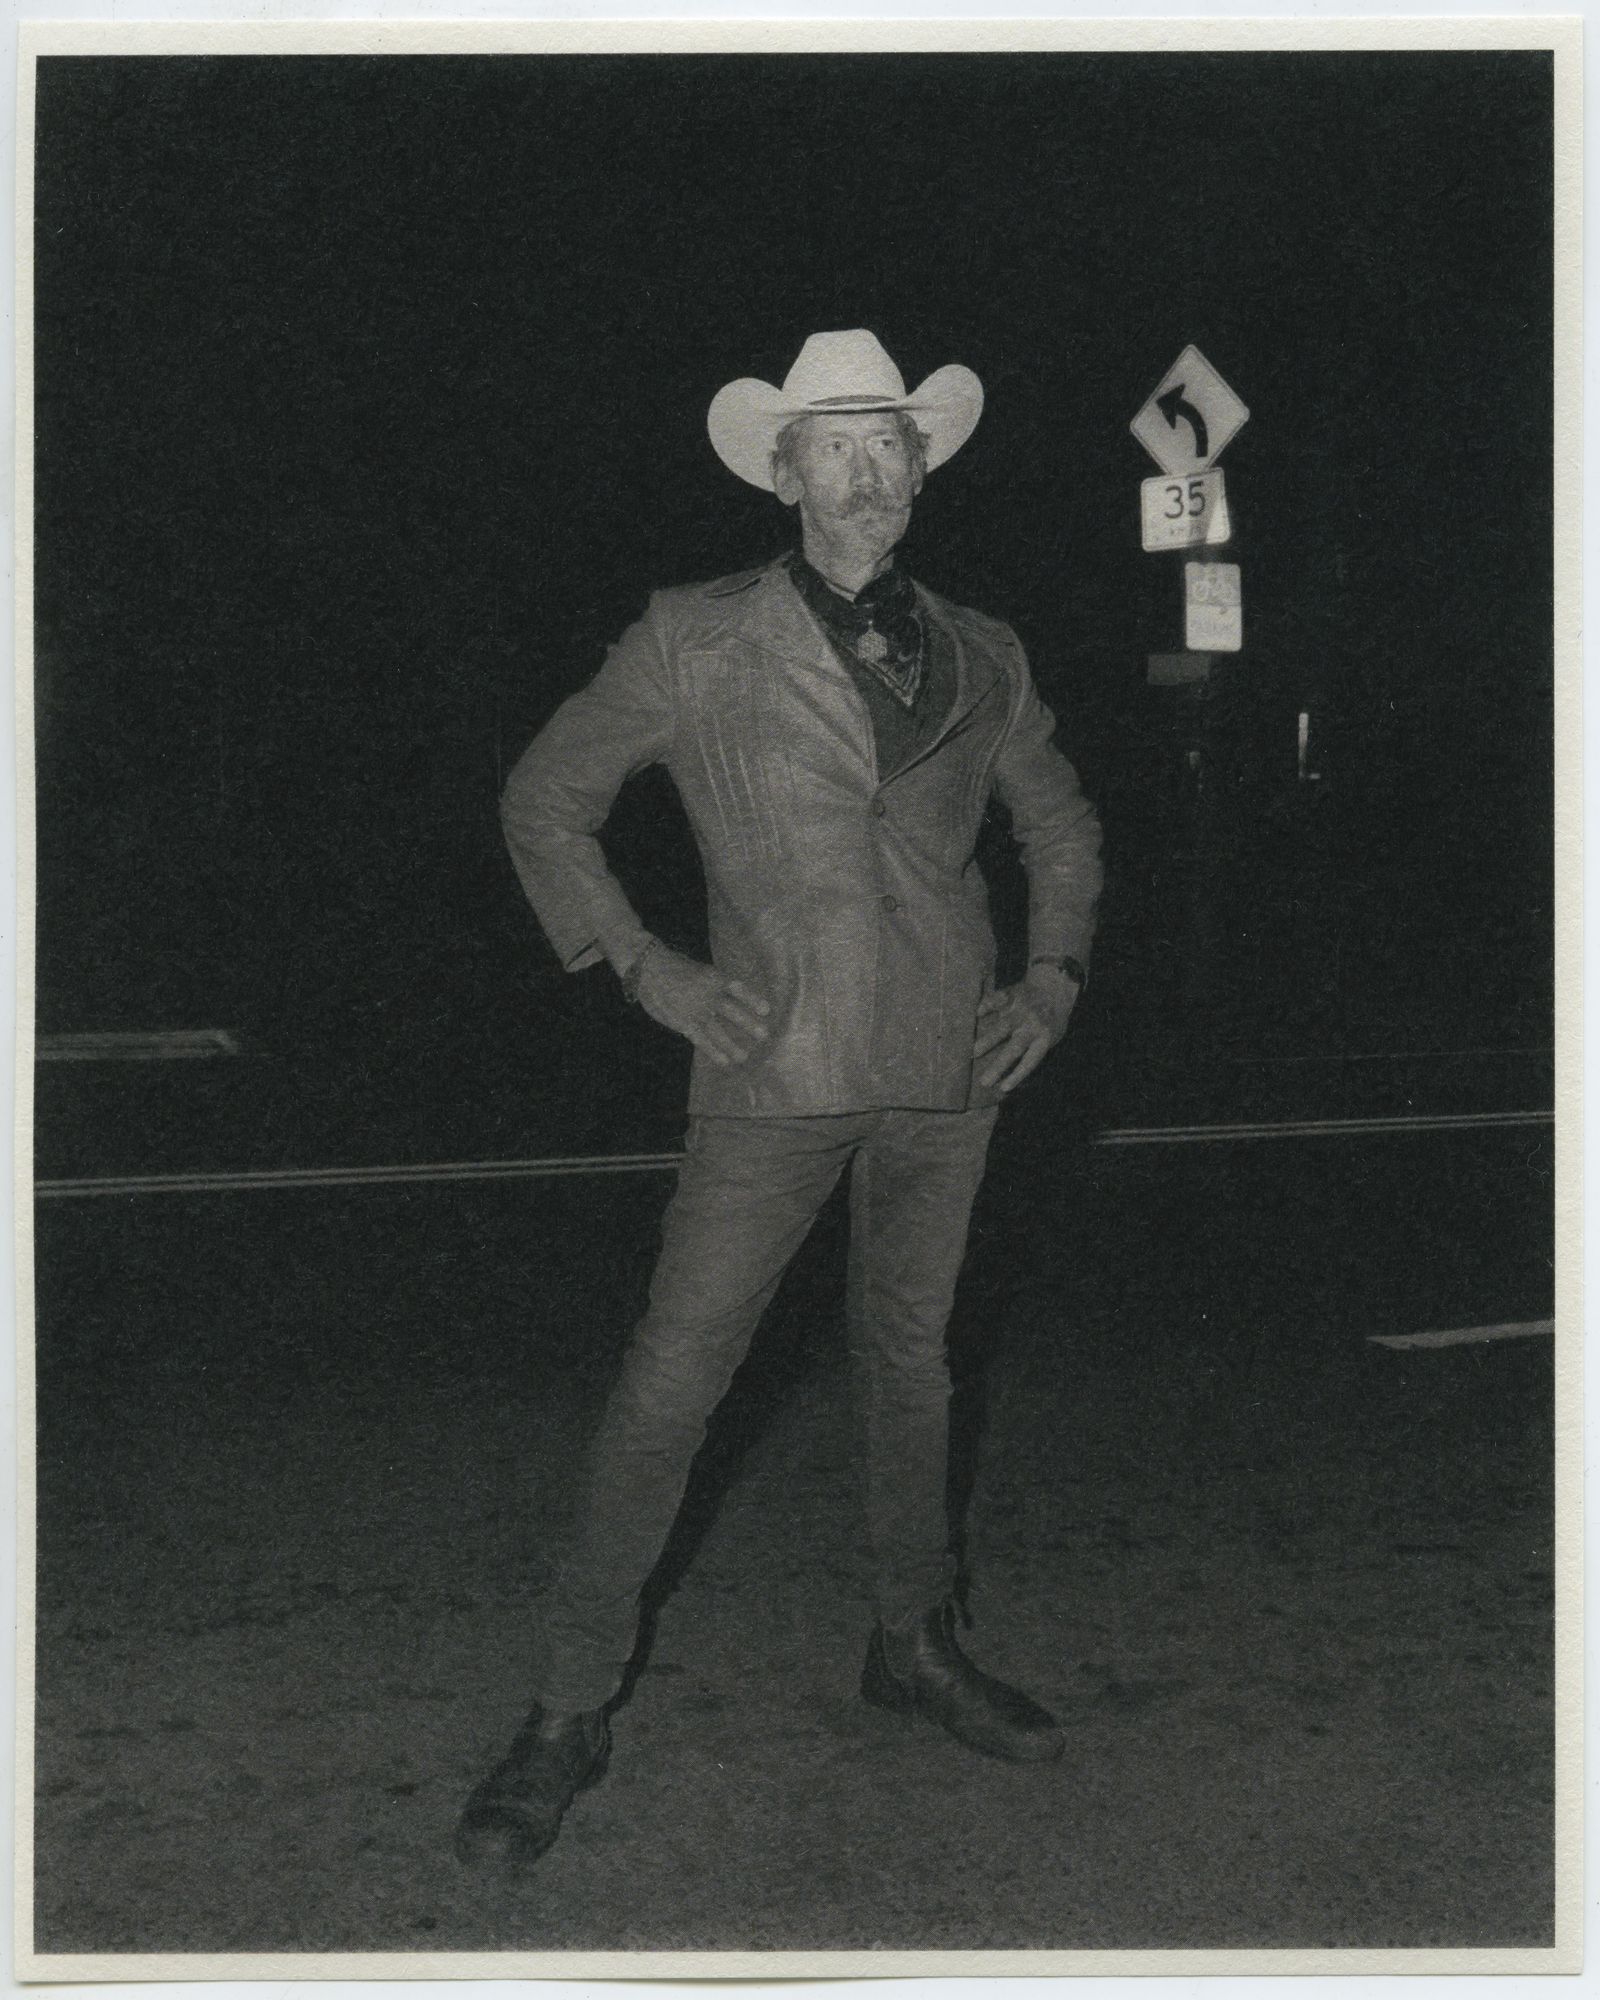 © Rory King - A local farmer in New South Wales dresses up in his best leather for a night on the town.